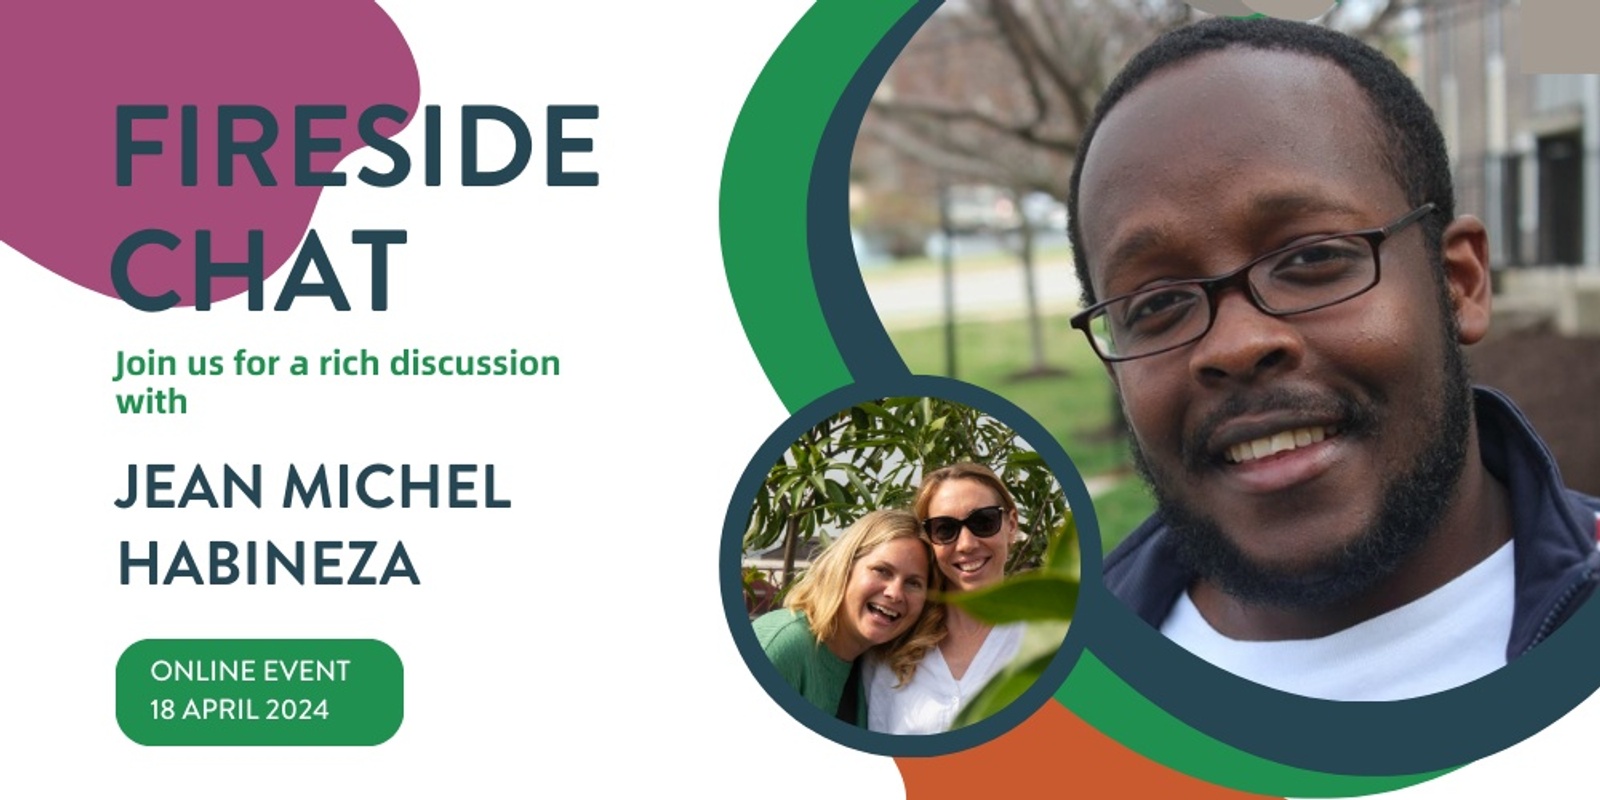 Banner image for Fireside Chat with Jean Michel Habineza